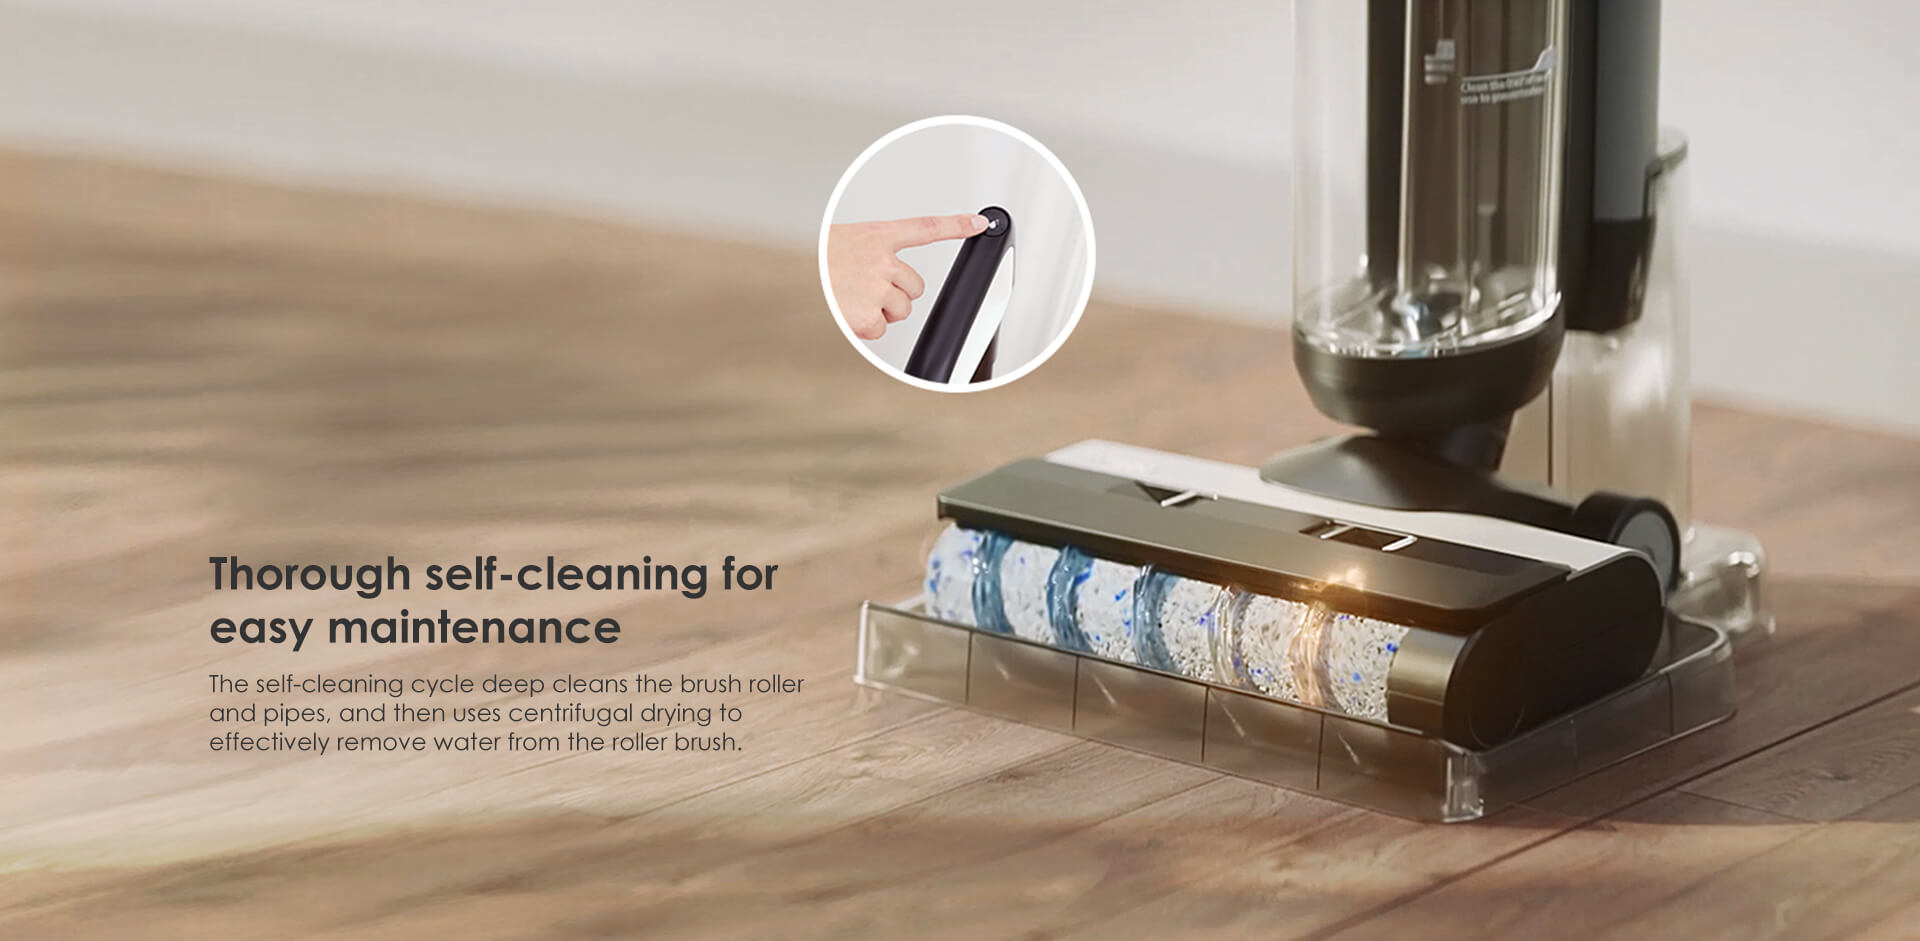 TINECO FLOOR ONE S5 Pro 2 • Here's my new favorite cleaning tool